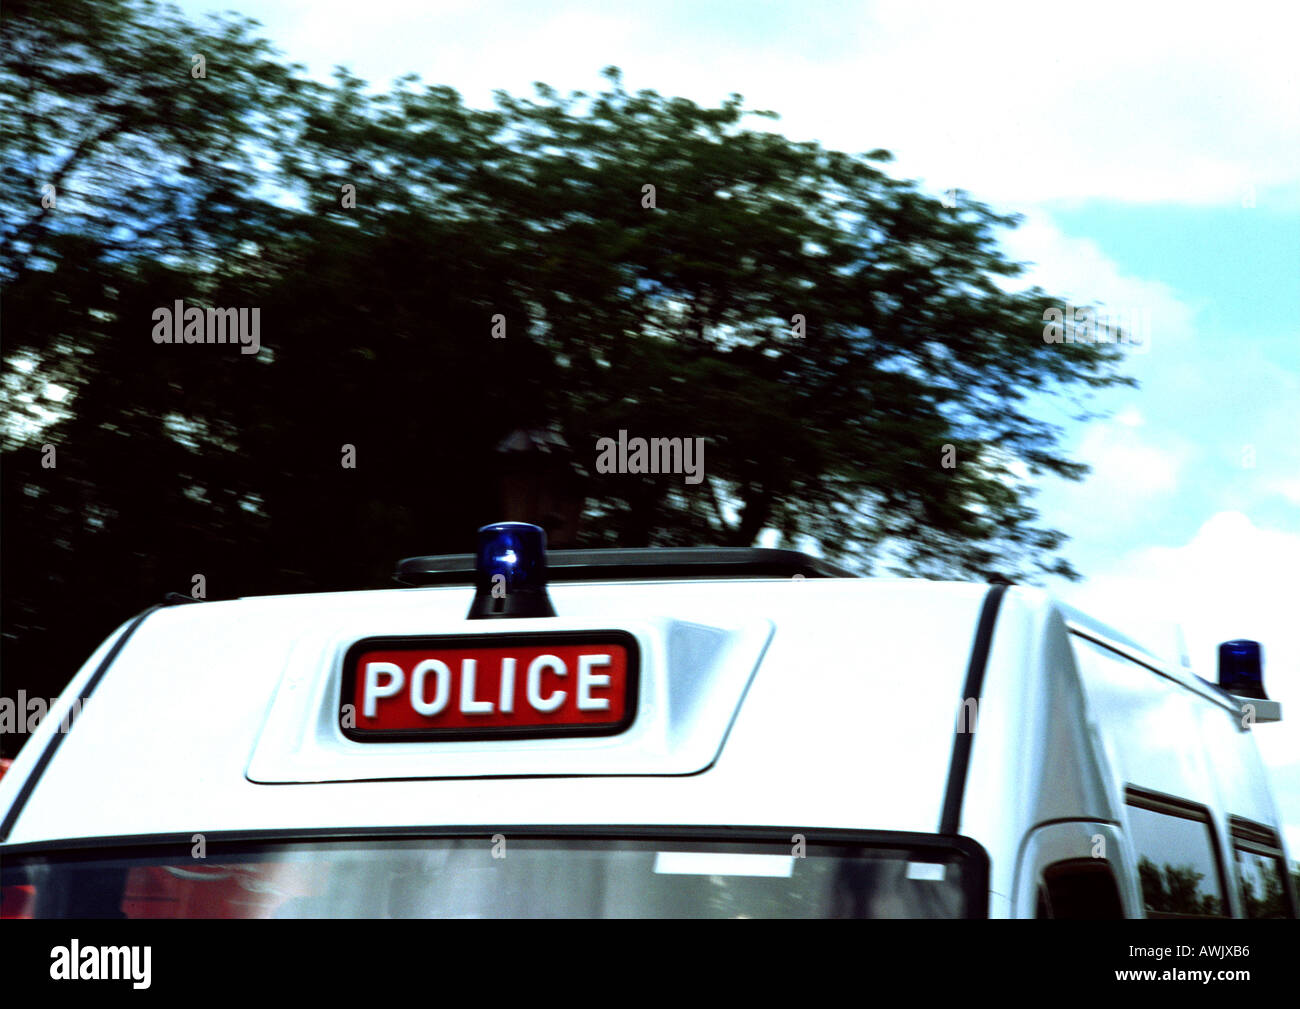 Top of police vehicle. Stock Photo